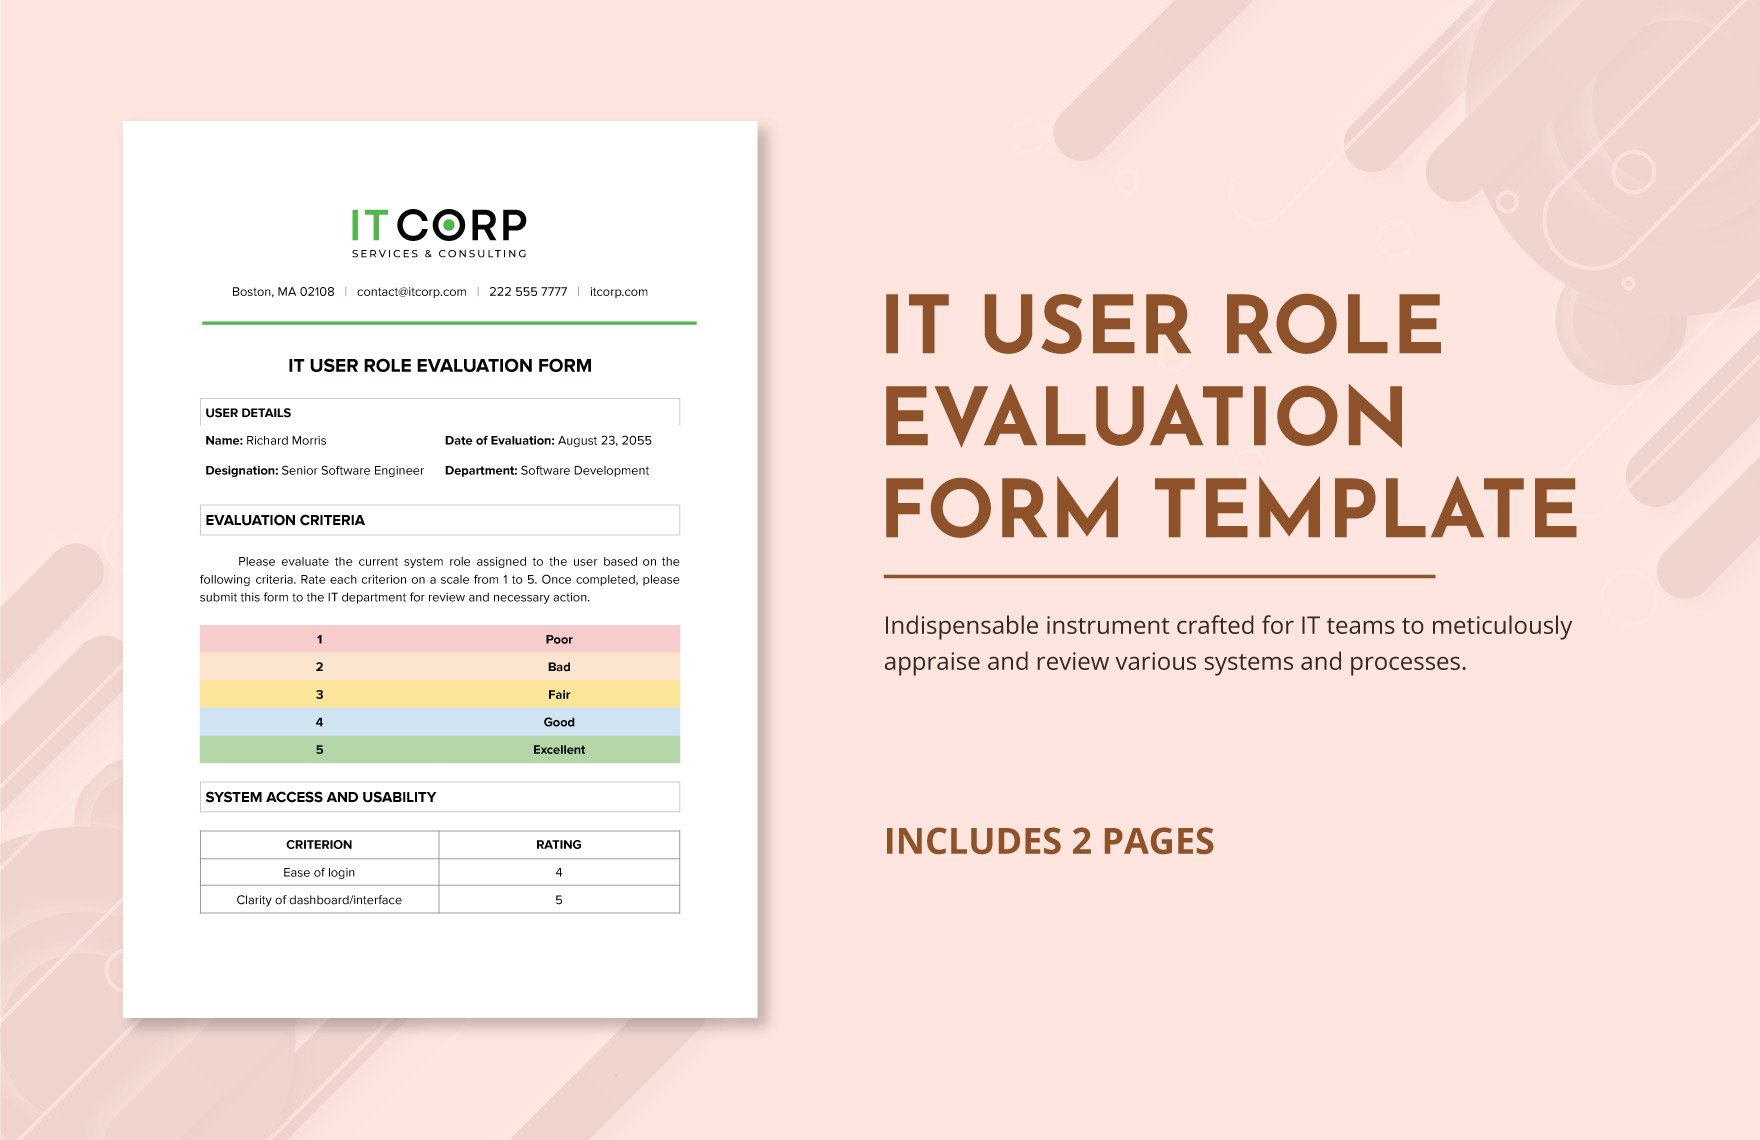 IT User Role Evaluation Form Template